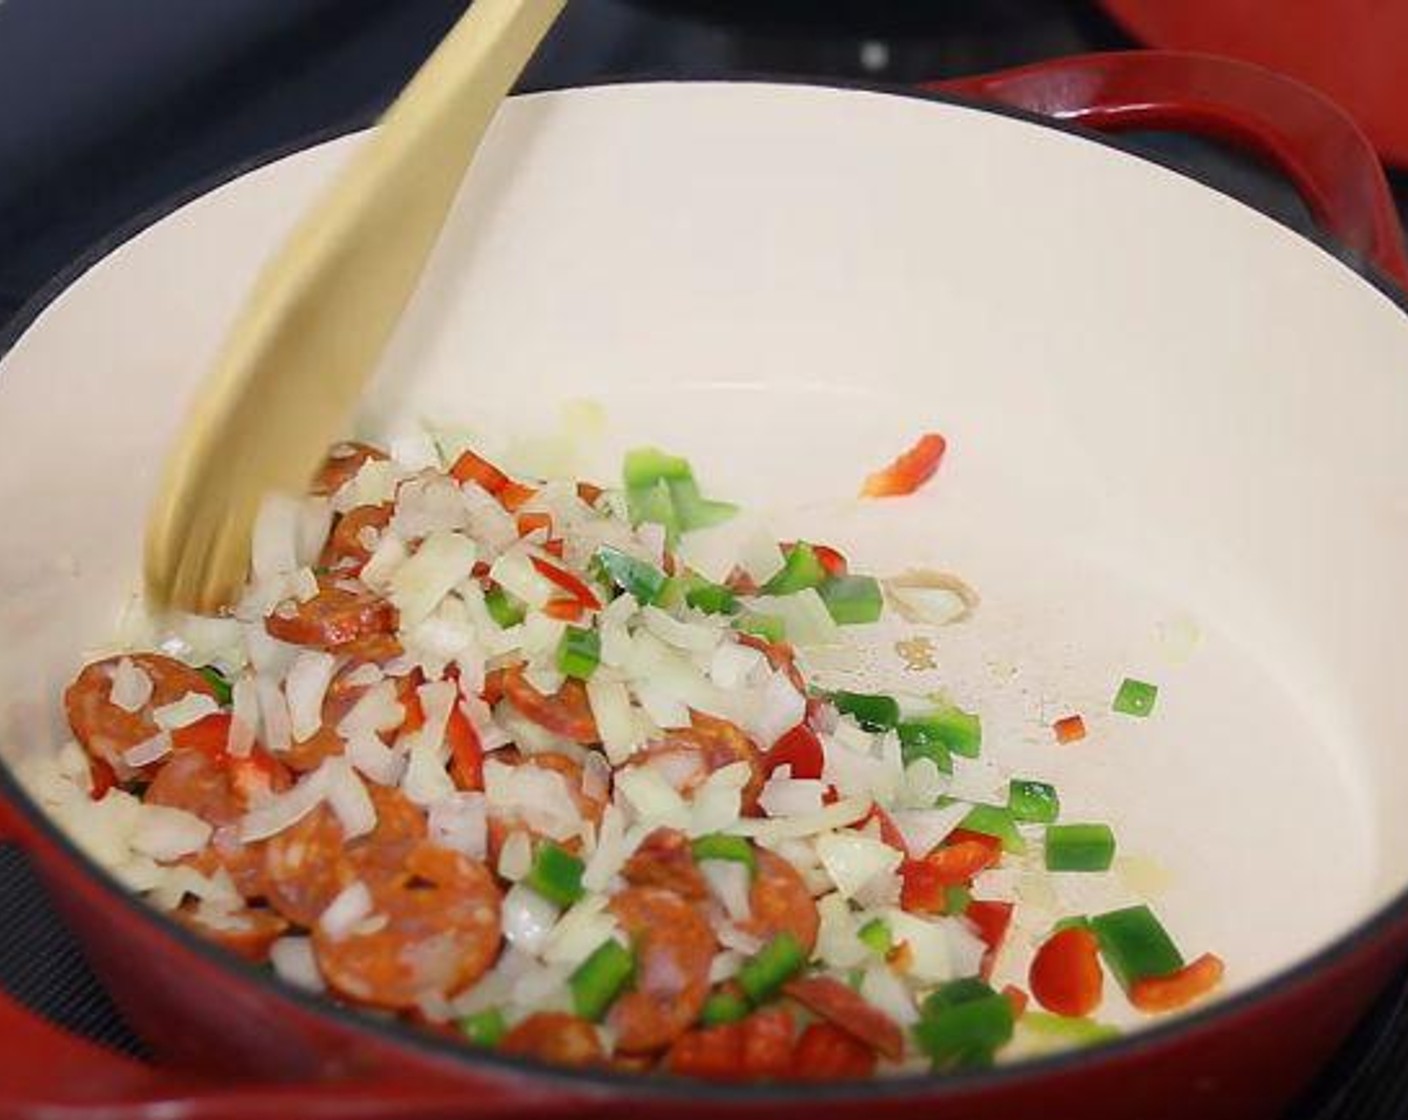 step 1 In a large oven-safe pan over medium high heat, heat Olive Oil (1 Tbsp). Add Red Bell Pepper (1/2), Green Bell Pepper (1/2), Garlic (3 cloves), Onion (1), and Spanish Chorizo (3.5 oz) and cook for 3-5 minutes or until it starts to soften. Stir in the garlic and cook for 30 second.